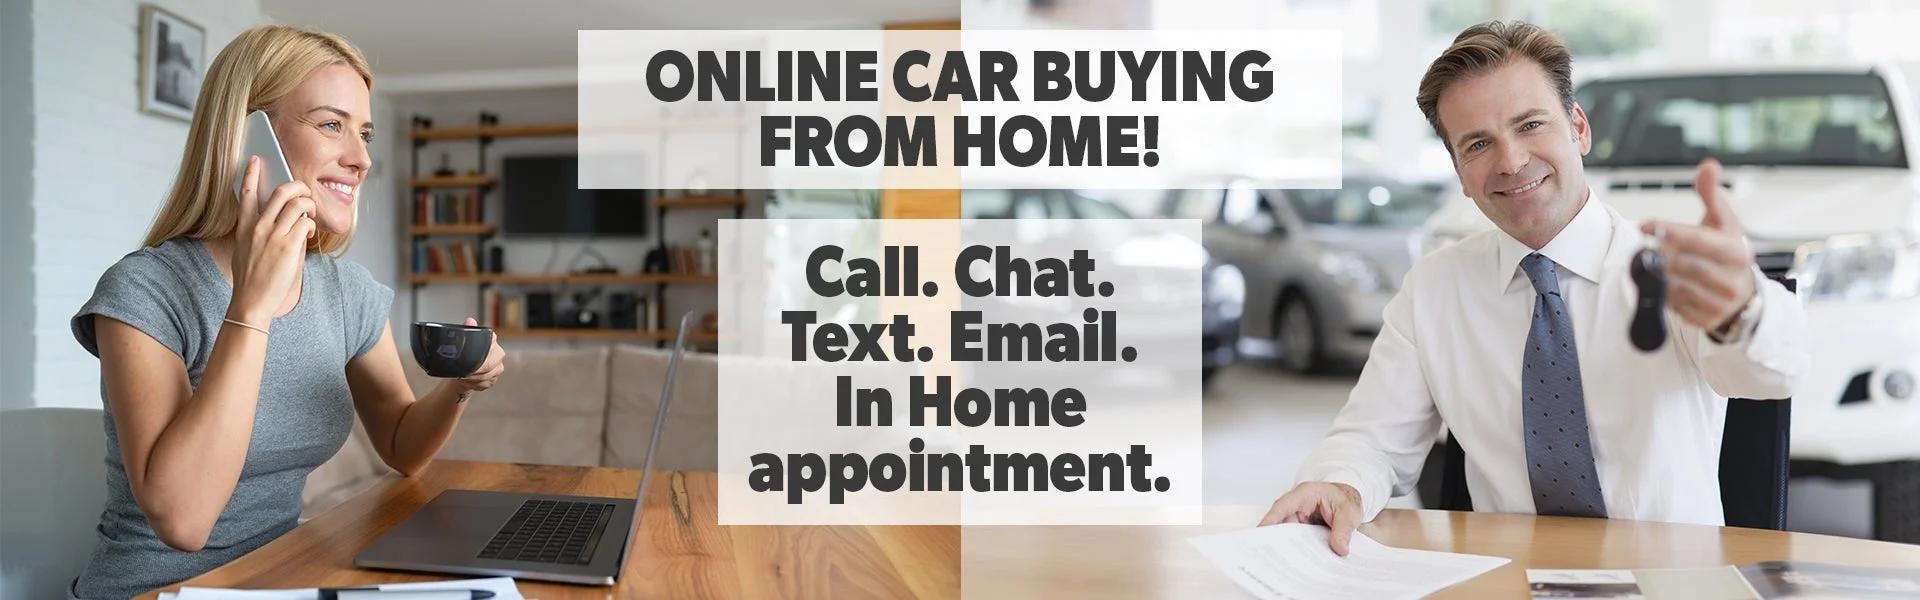 Online Car Buying at Home from Waldorf Toyota